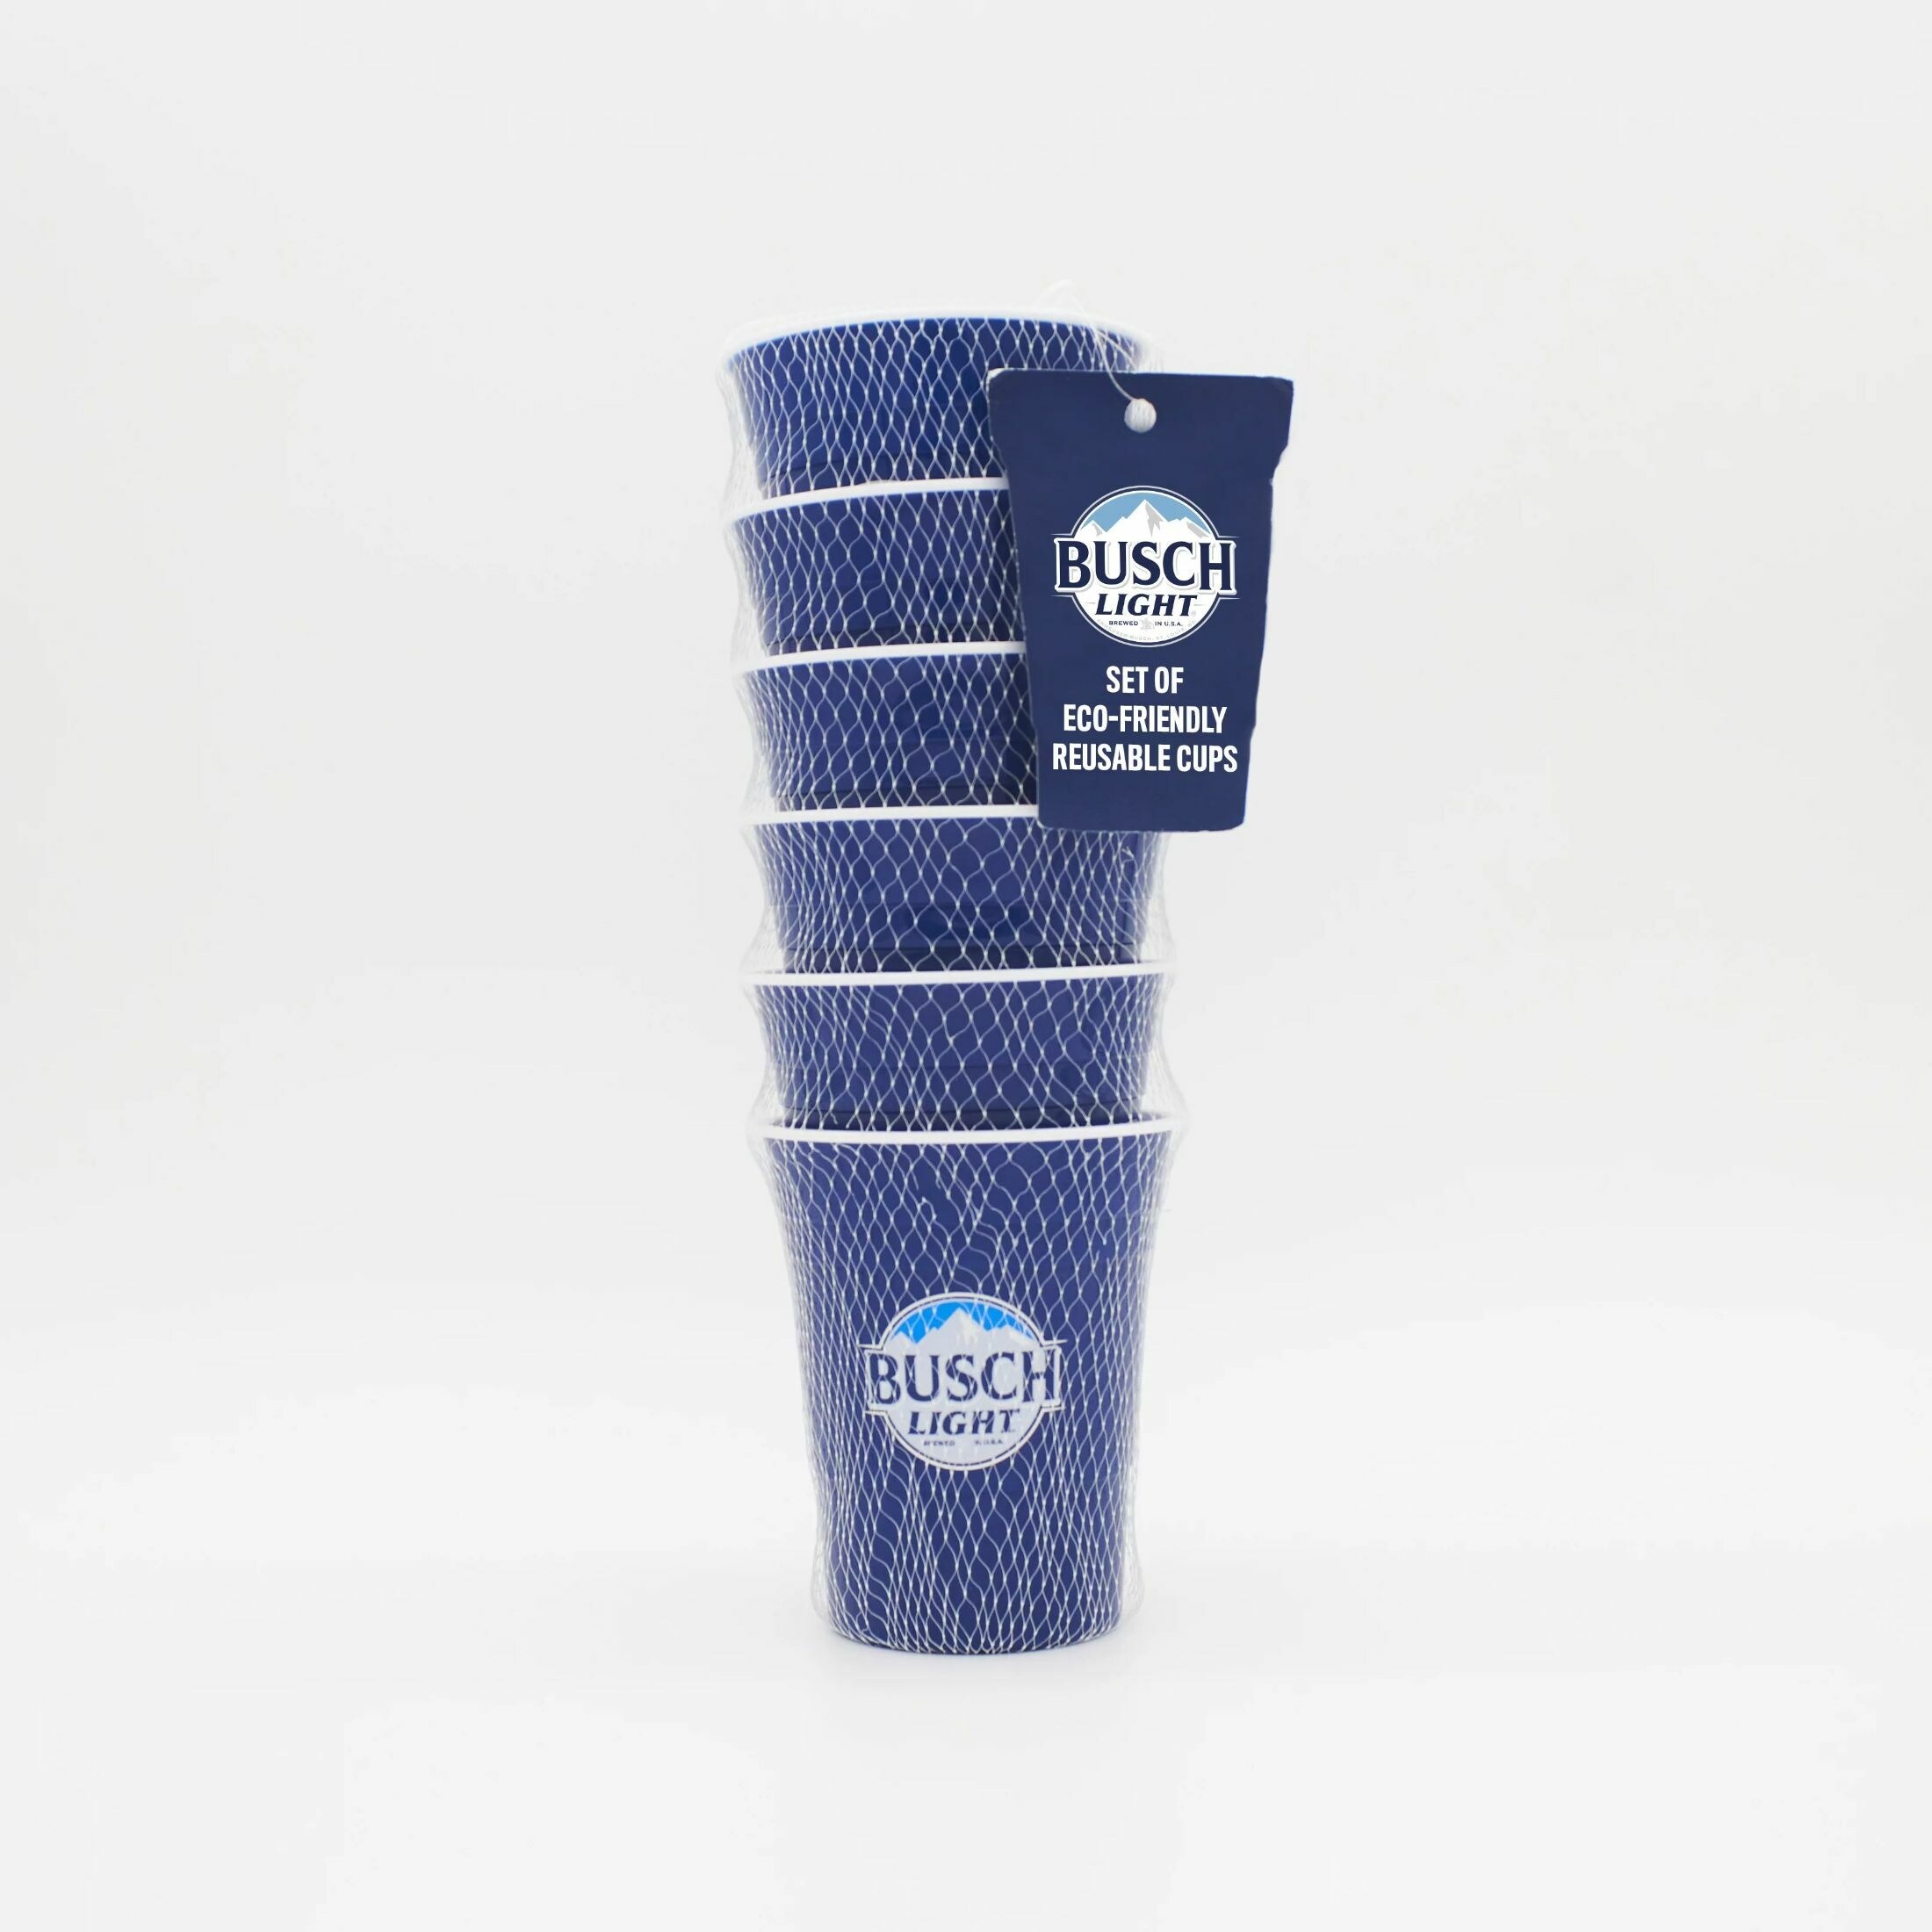 Milwaukee Brewers 18oz Coffee Tumbler with Silicone Grip